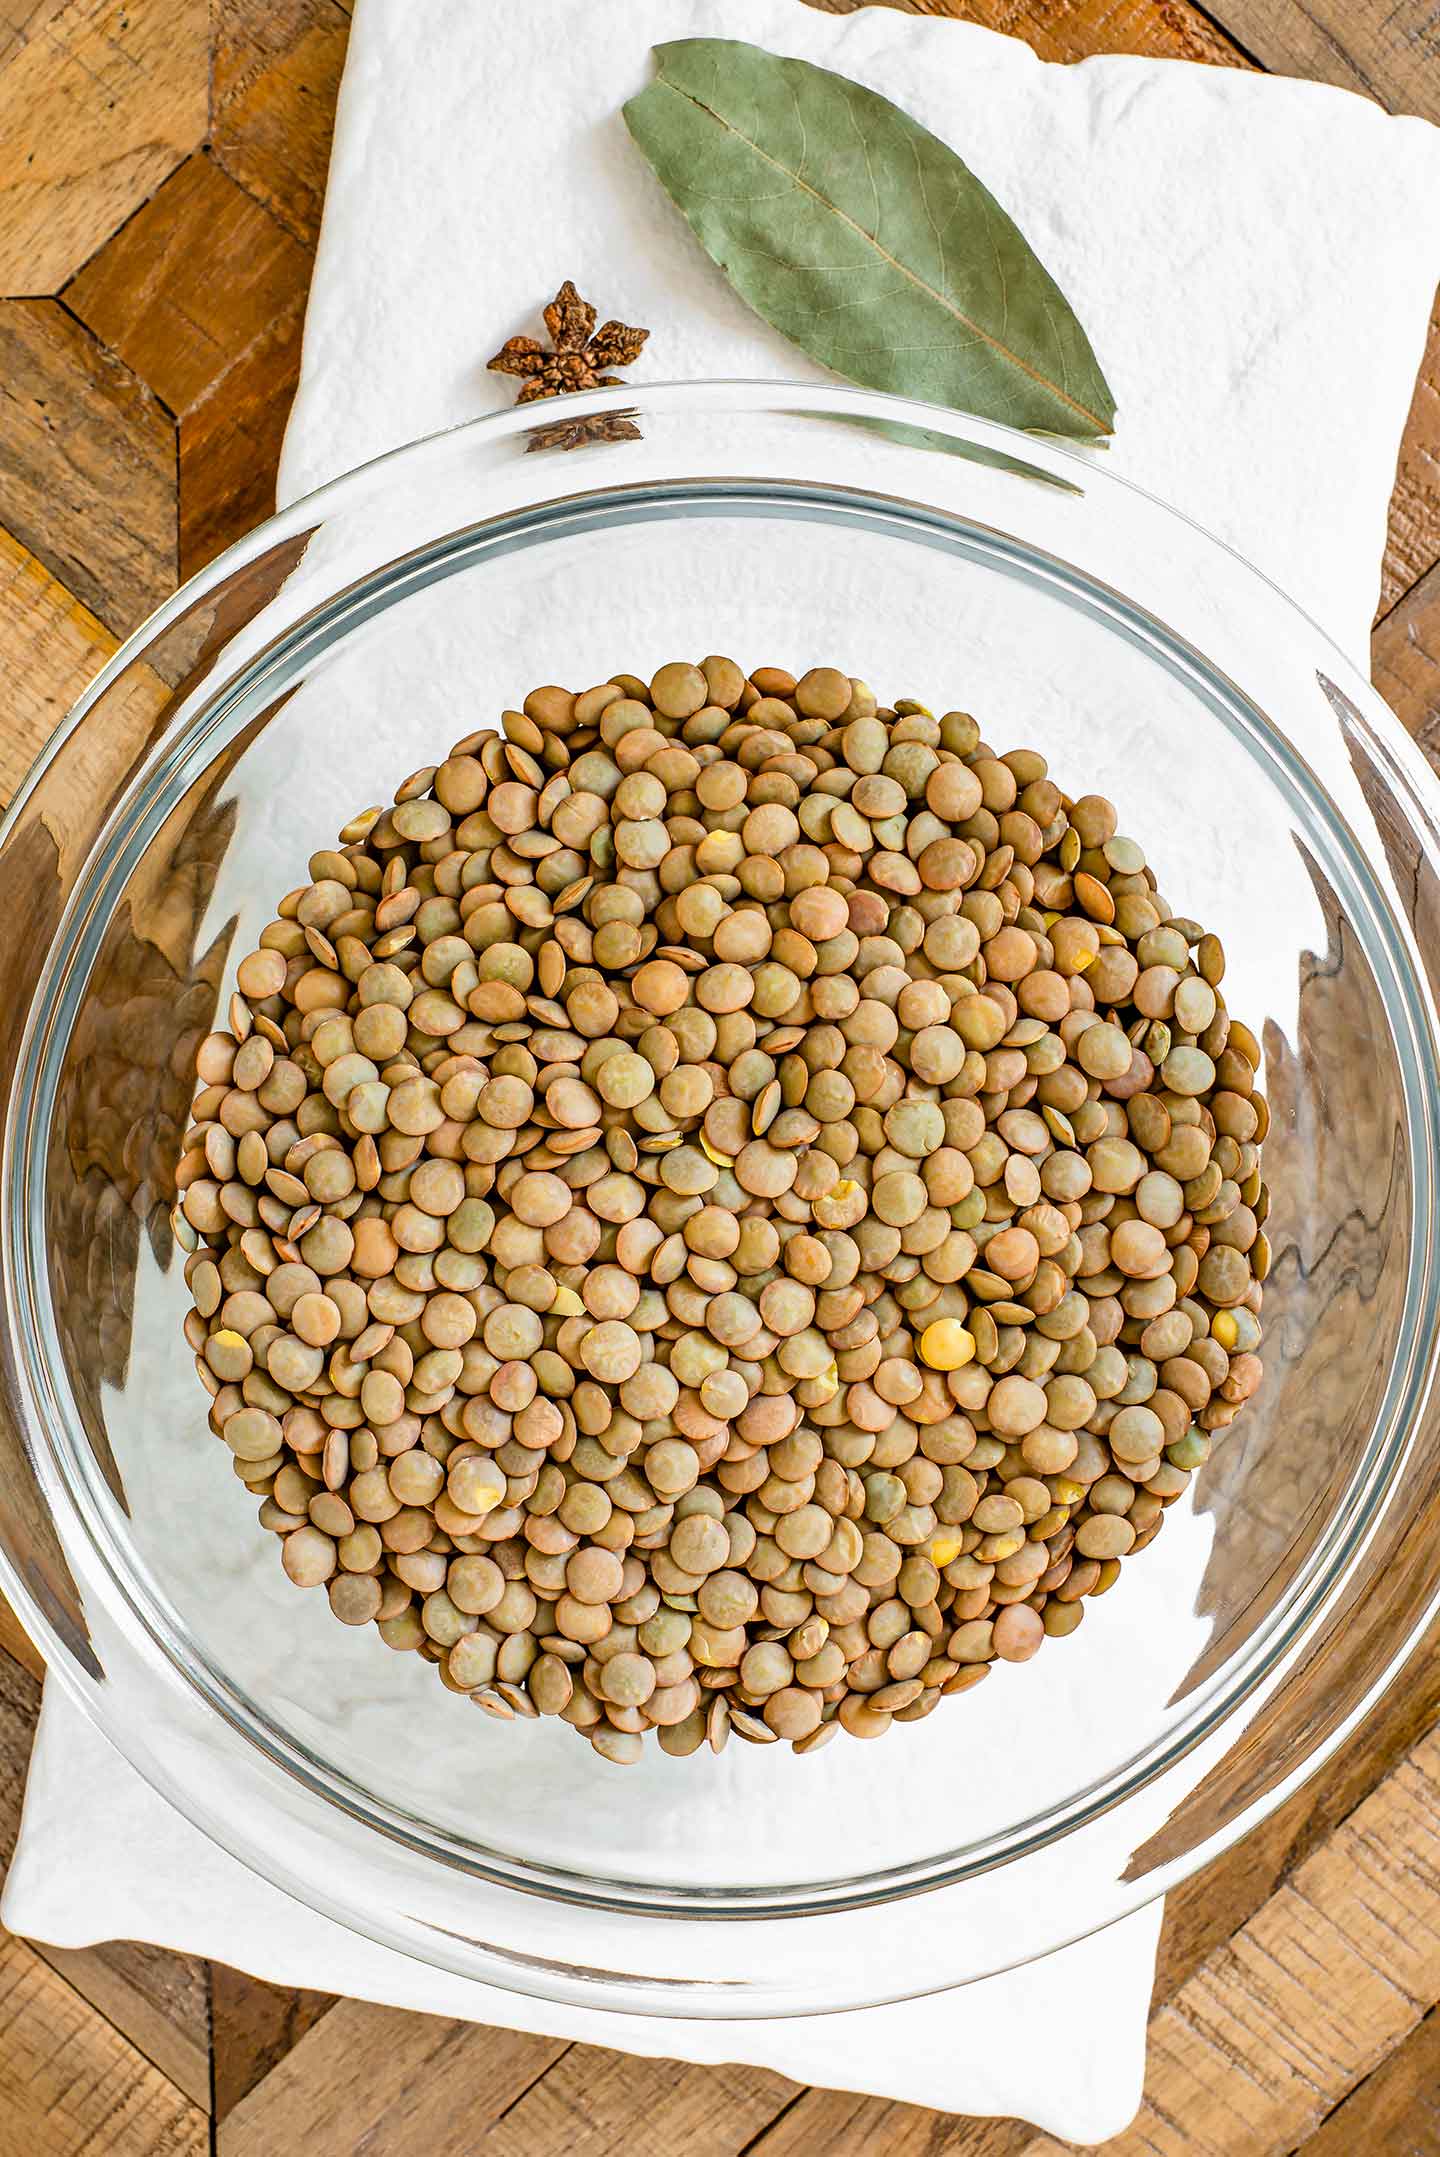 Top down view of dried green lentils in a glass bowl atop a white tray. A bay leaf and star anise pod lay on the white tray.